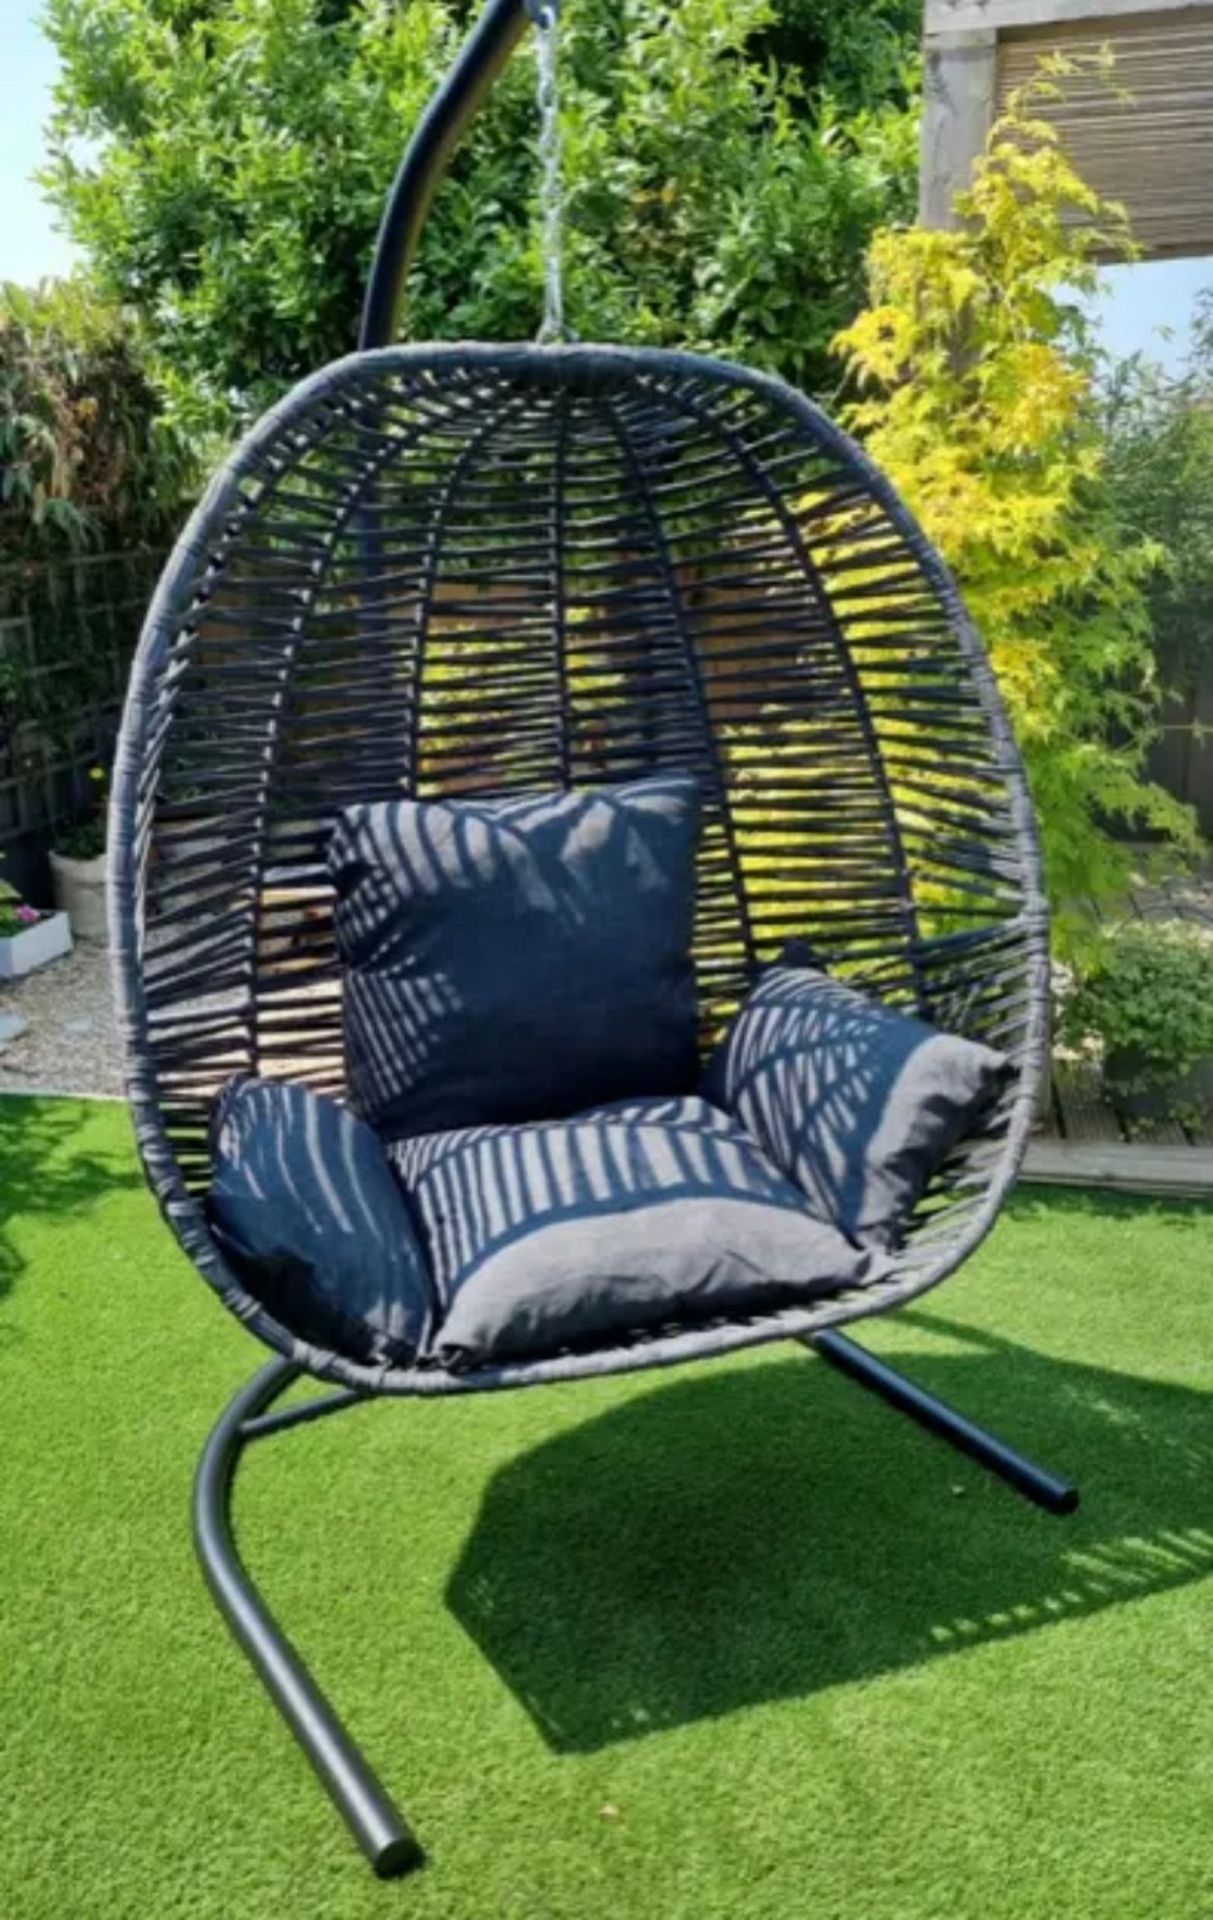 BRAND NEW - Luxury Hanging Swinging Egg Chair Outdoor Garden Patio Chair Grey With Cushion - Image 2 of 3